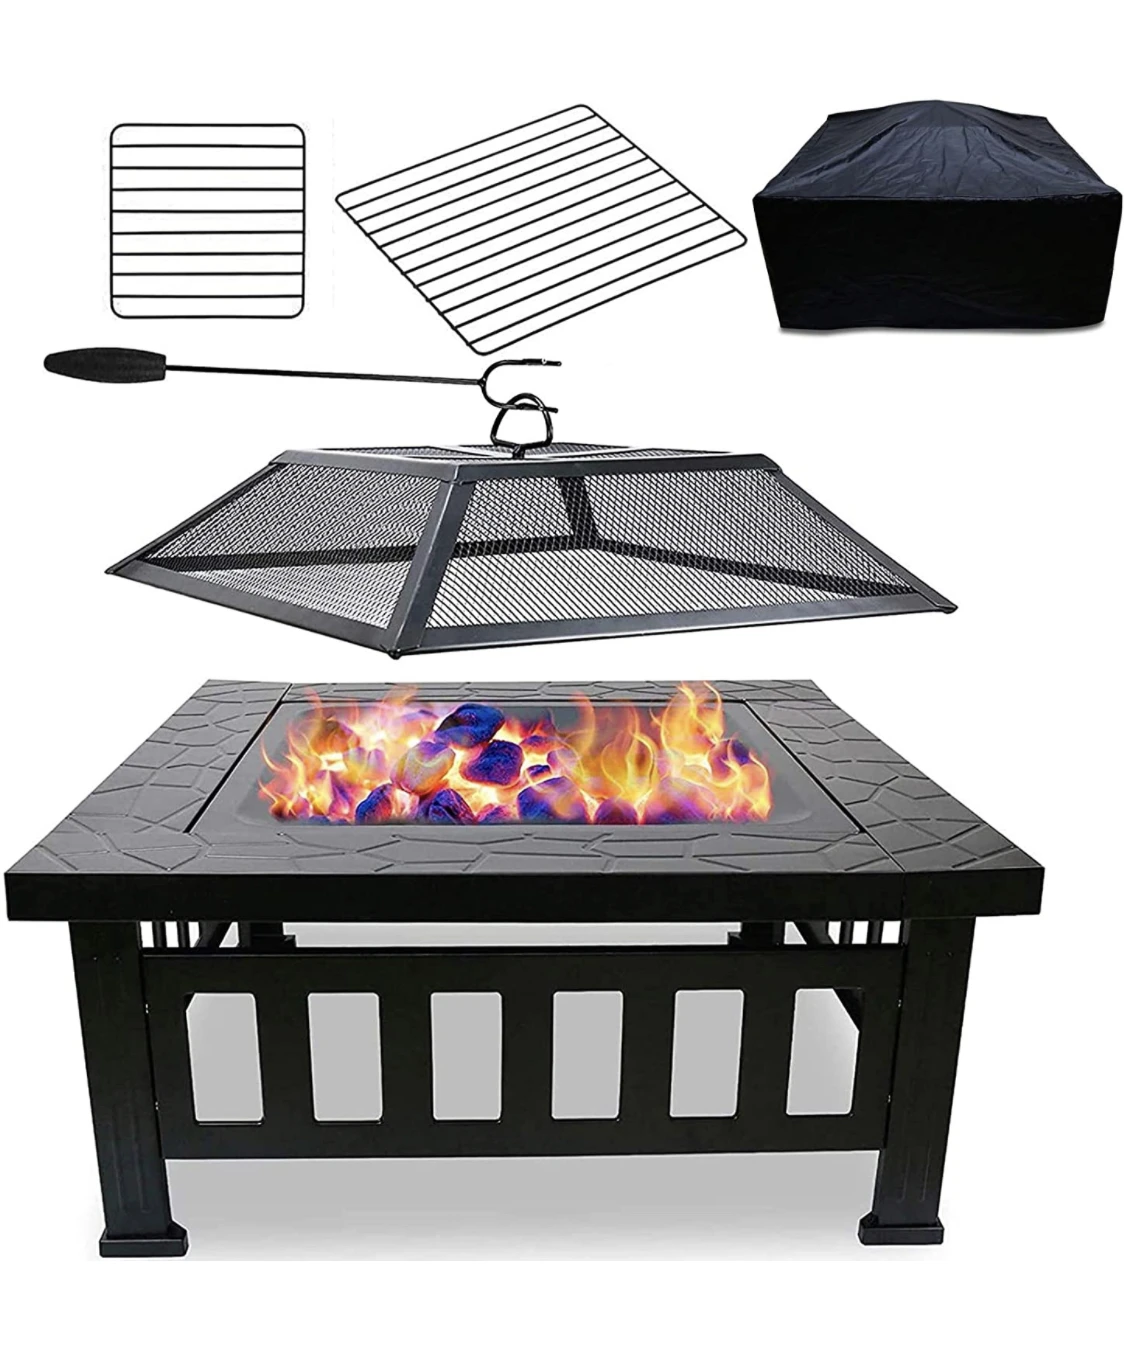 NO. 8866 Outdoor Steel Fire pit Table wood burning fogon brasero for camping (1600460676427)